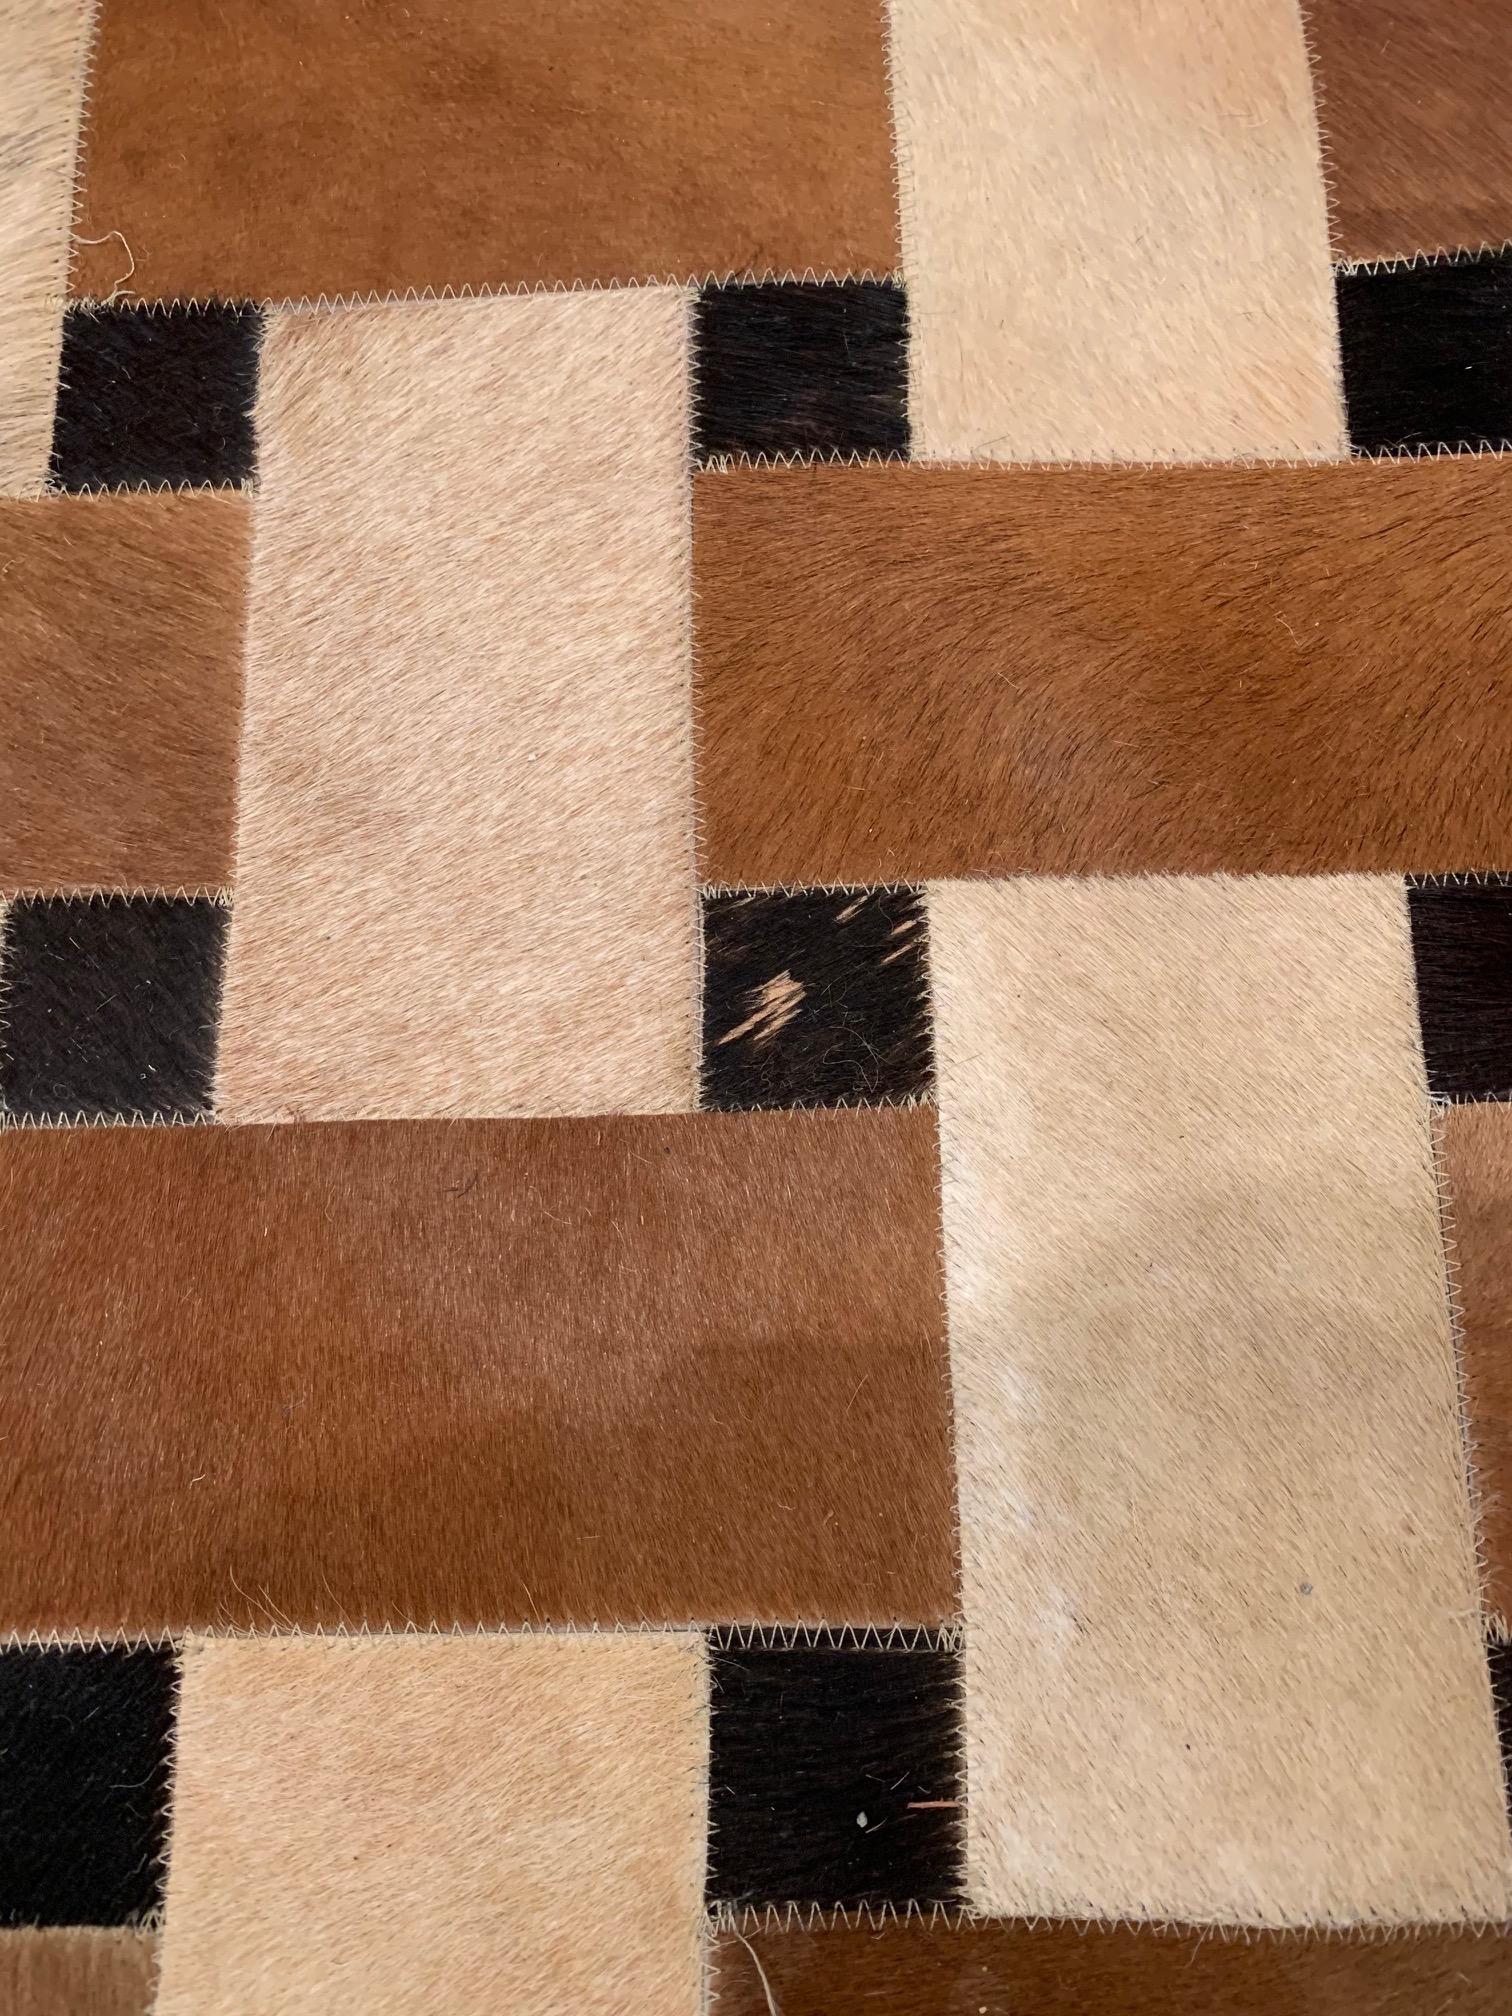 Contemporary Sophisticated Patchwork Cowhide Area Rug